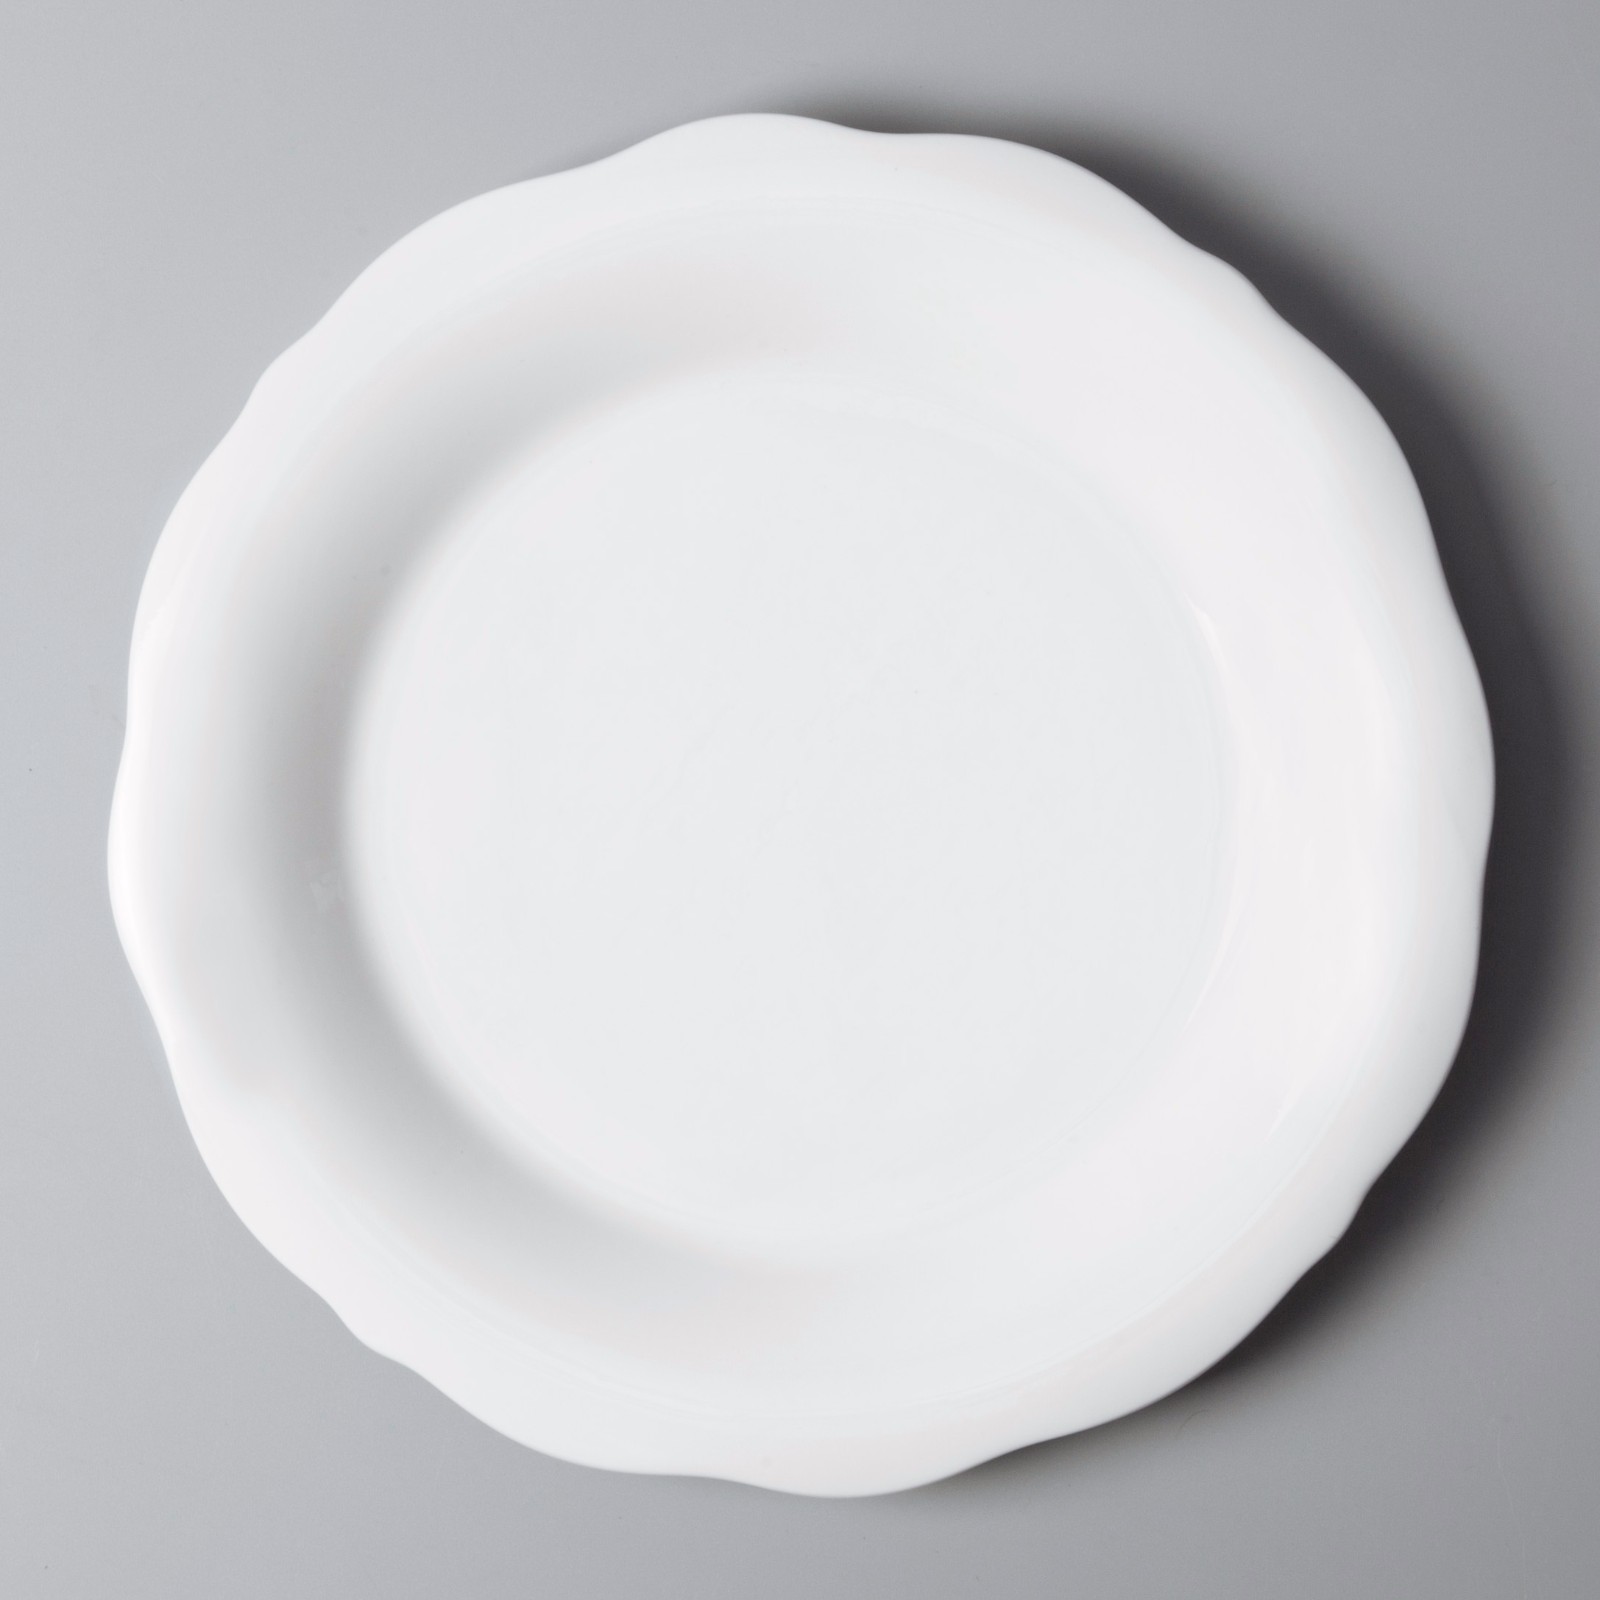 Two Eight sample white dinnerware sets for 8 series for home-2